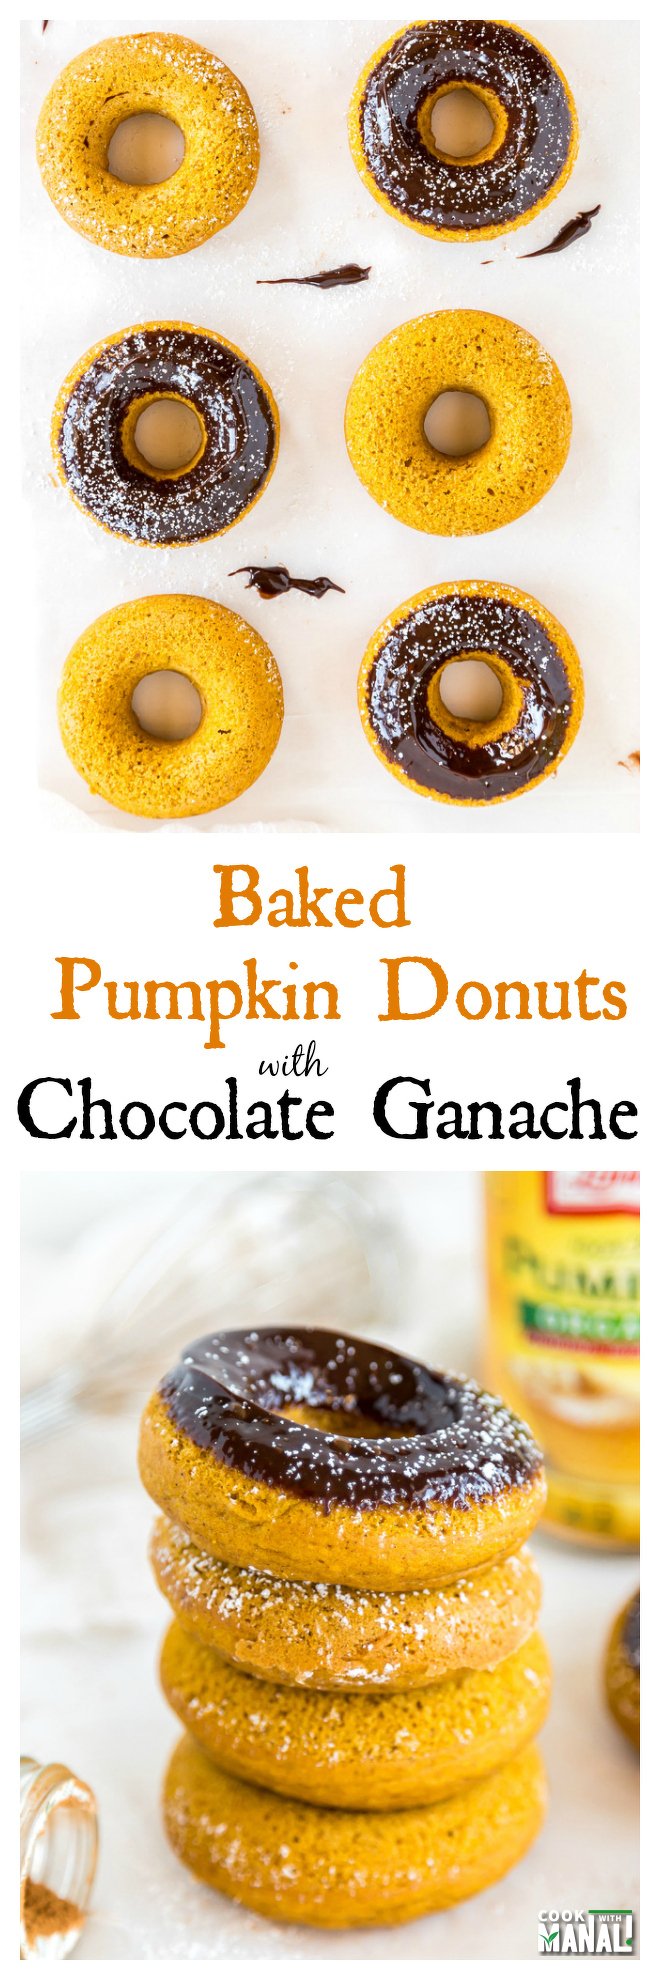 Baked Pumpkin Donuts with Chocolate Ganache collage